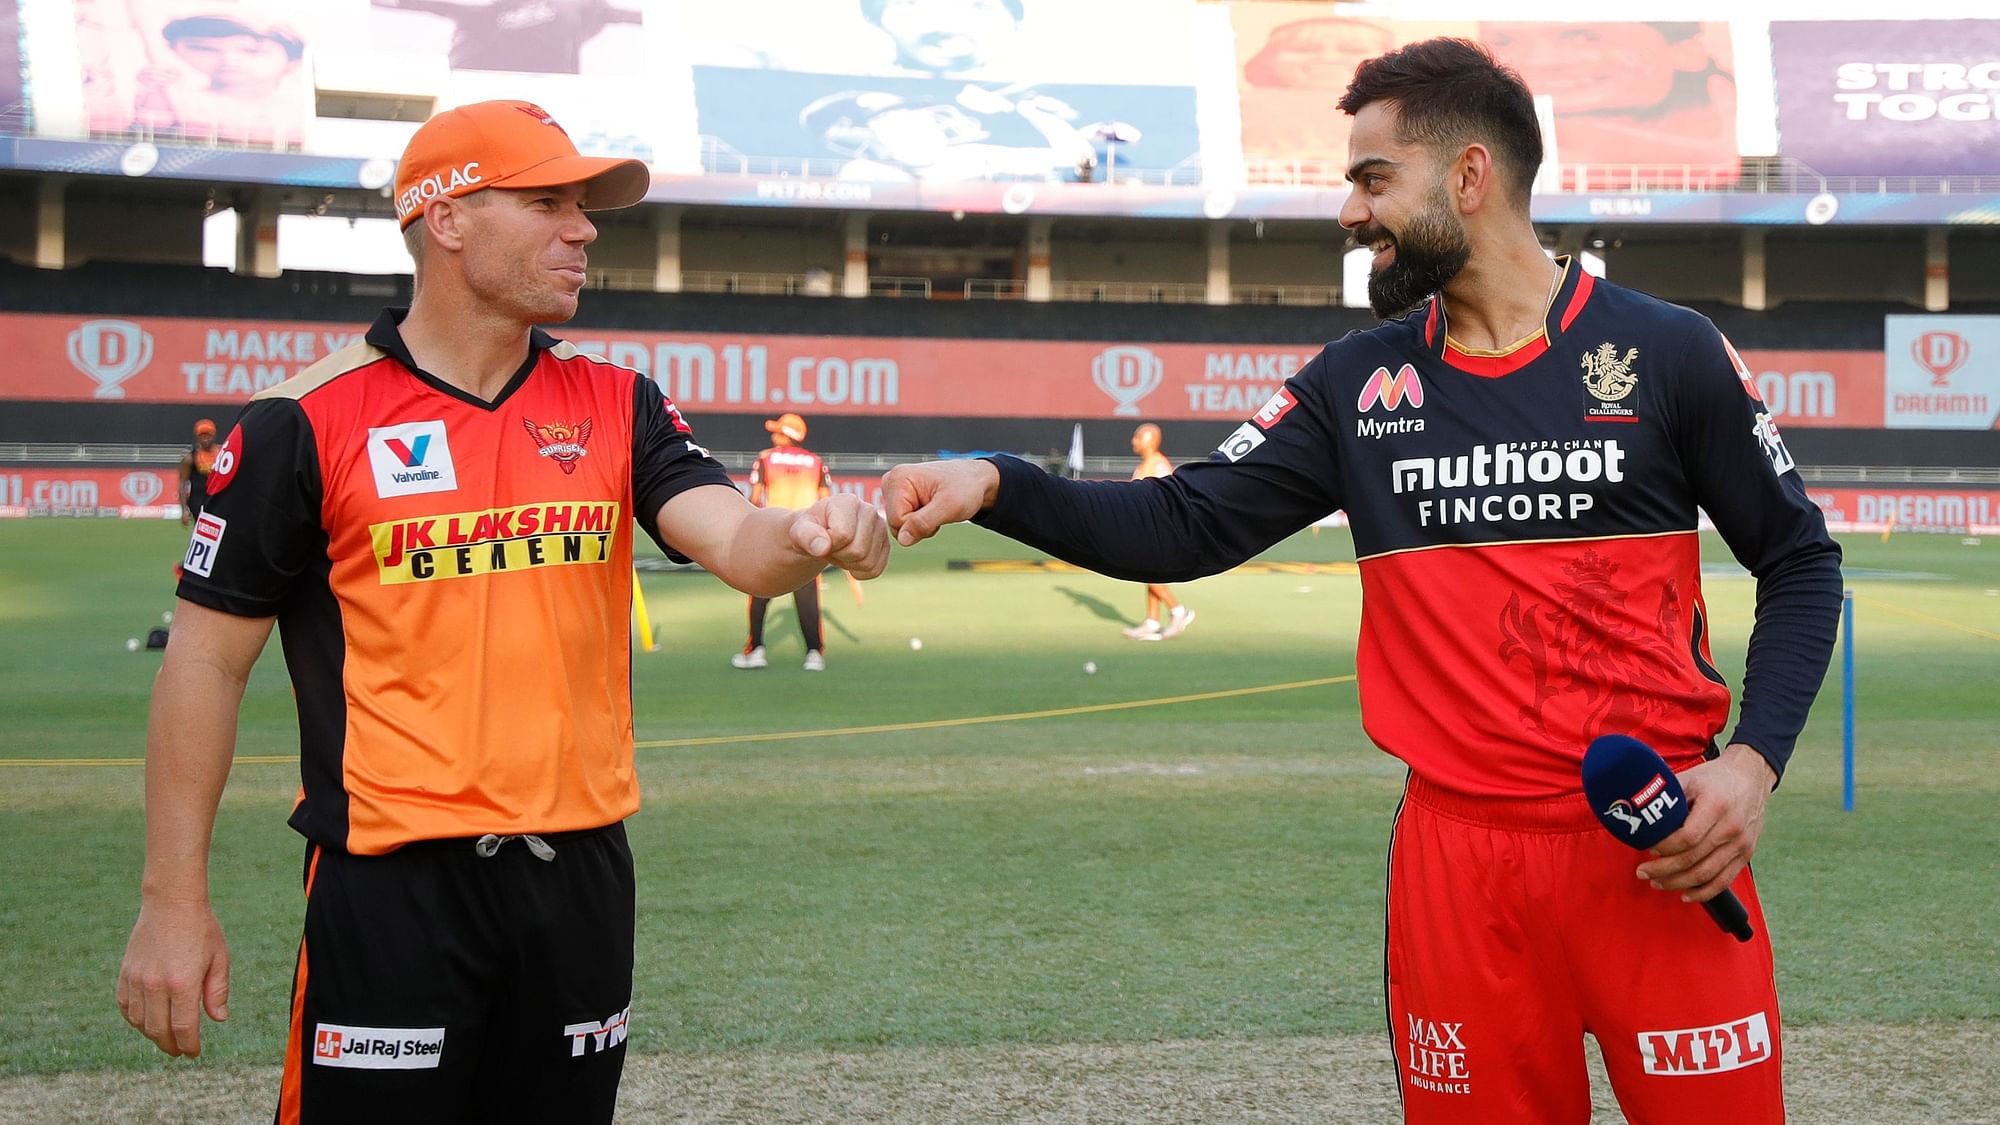 Sunrisers Hyderabad play Royal Challengers Bangalore in a knockout game, the winner of which plays Delhi Capitals for a spot in the final.